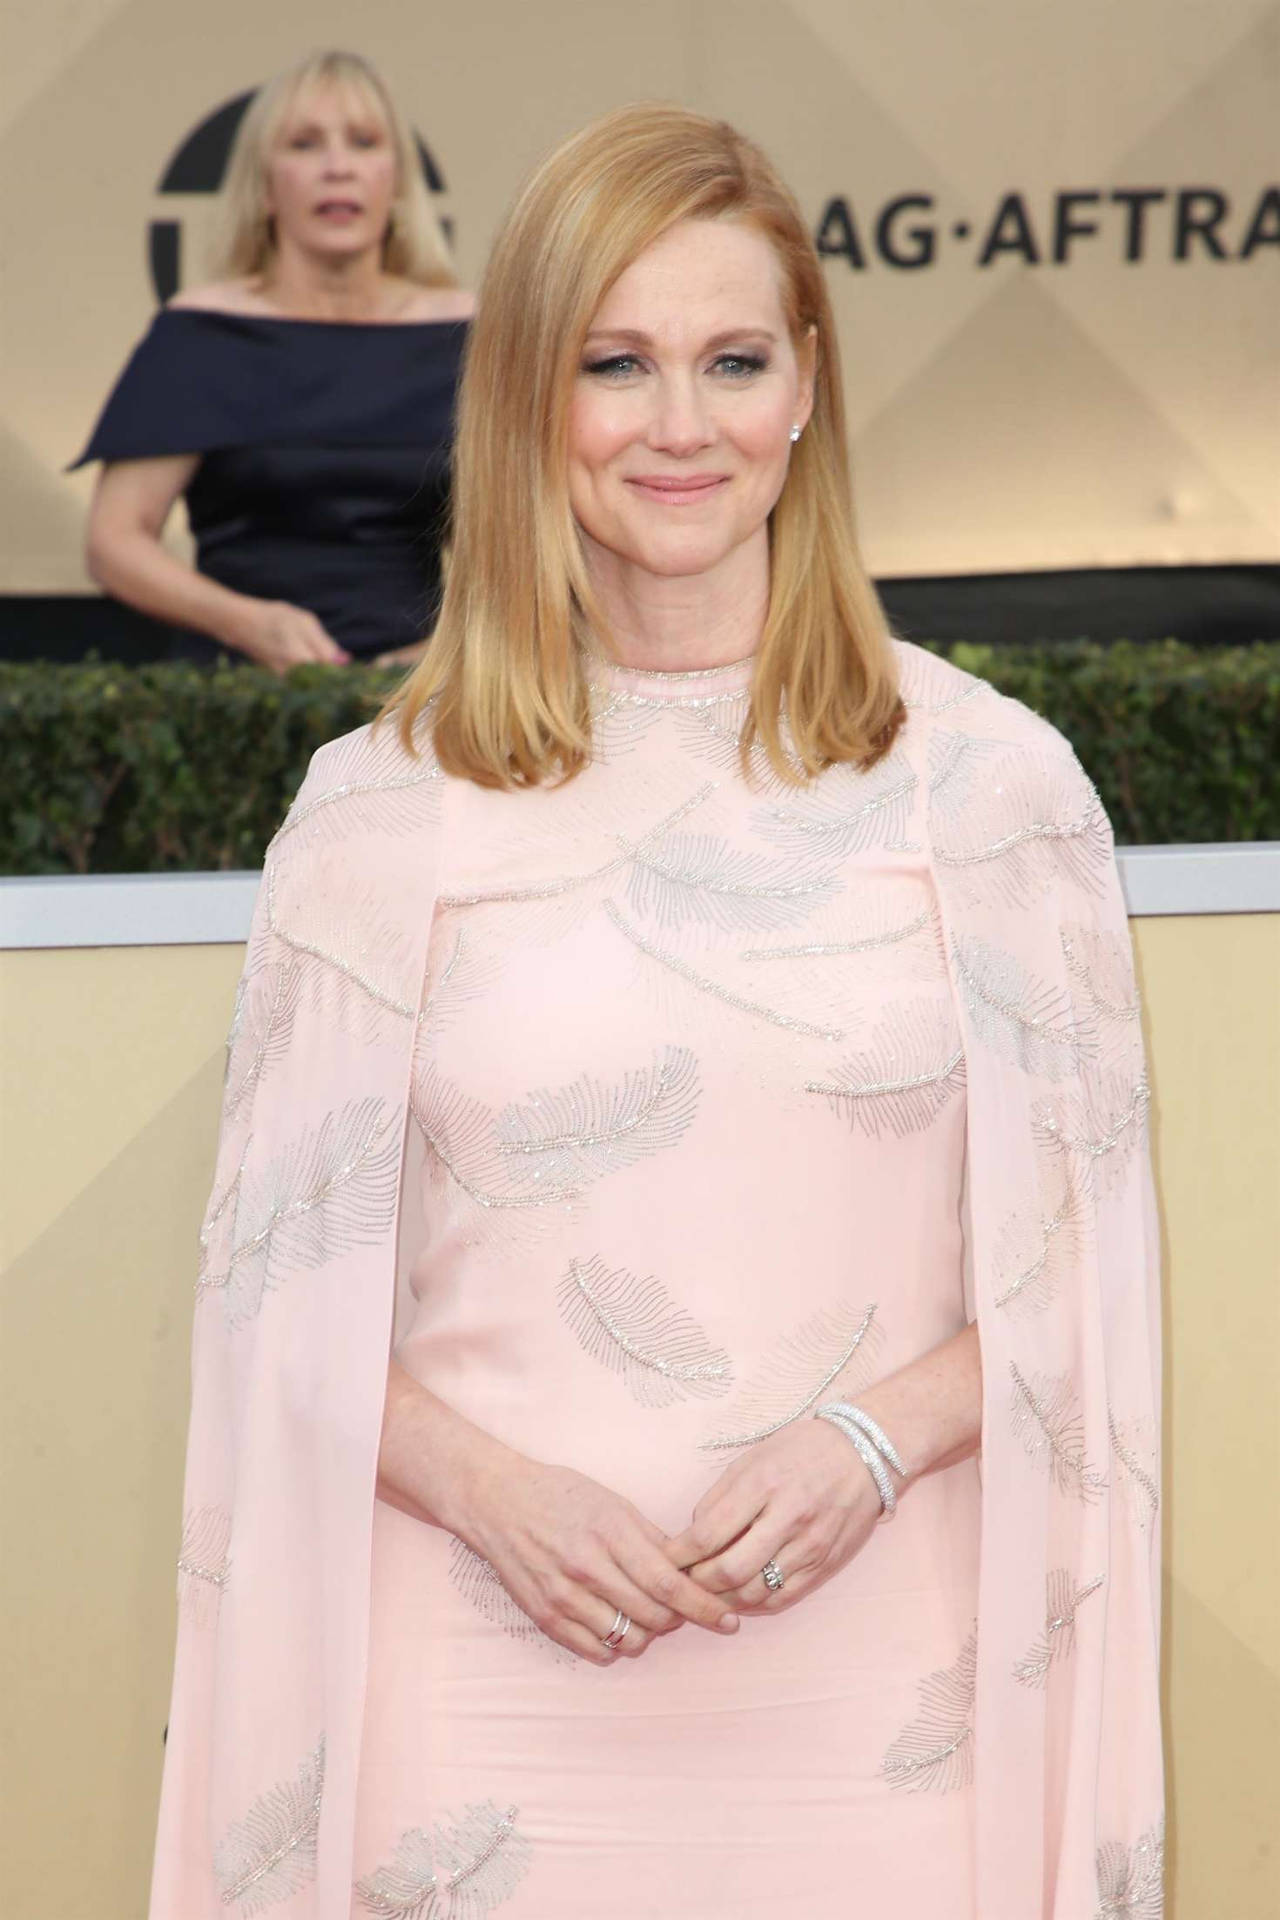 Lauralinney Pink Cape Couture Gown Translates To 